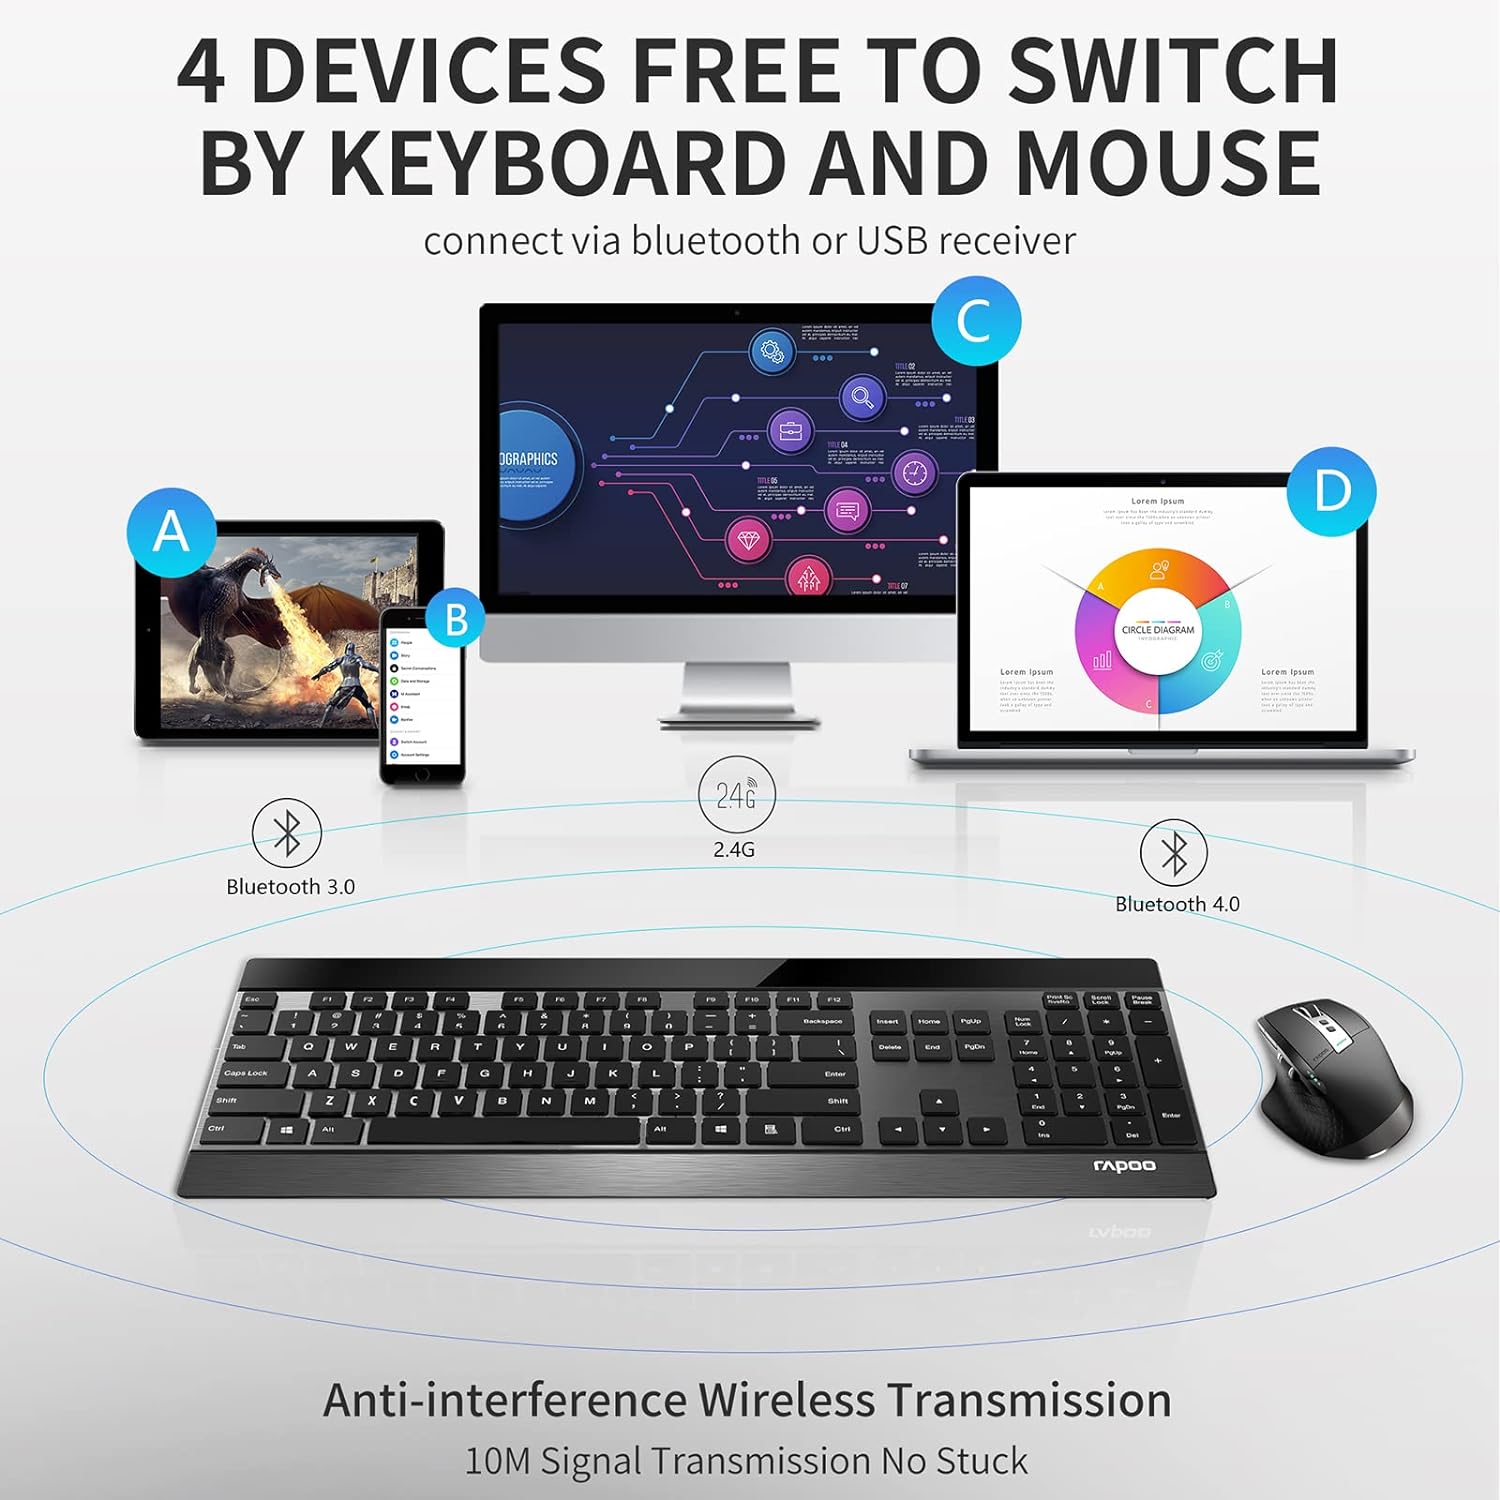 Estimate of 'RAPOO Wireless Keyboard and Laser Mouse Combo, Multi Device (Bluetooth 4.0+3.0+2.4G) Keyboard and Mouse Set, Ultra-Slim Computer Keyboard Compact Design'